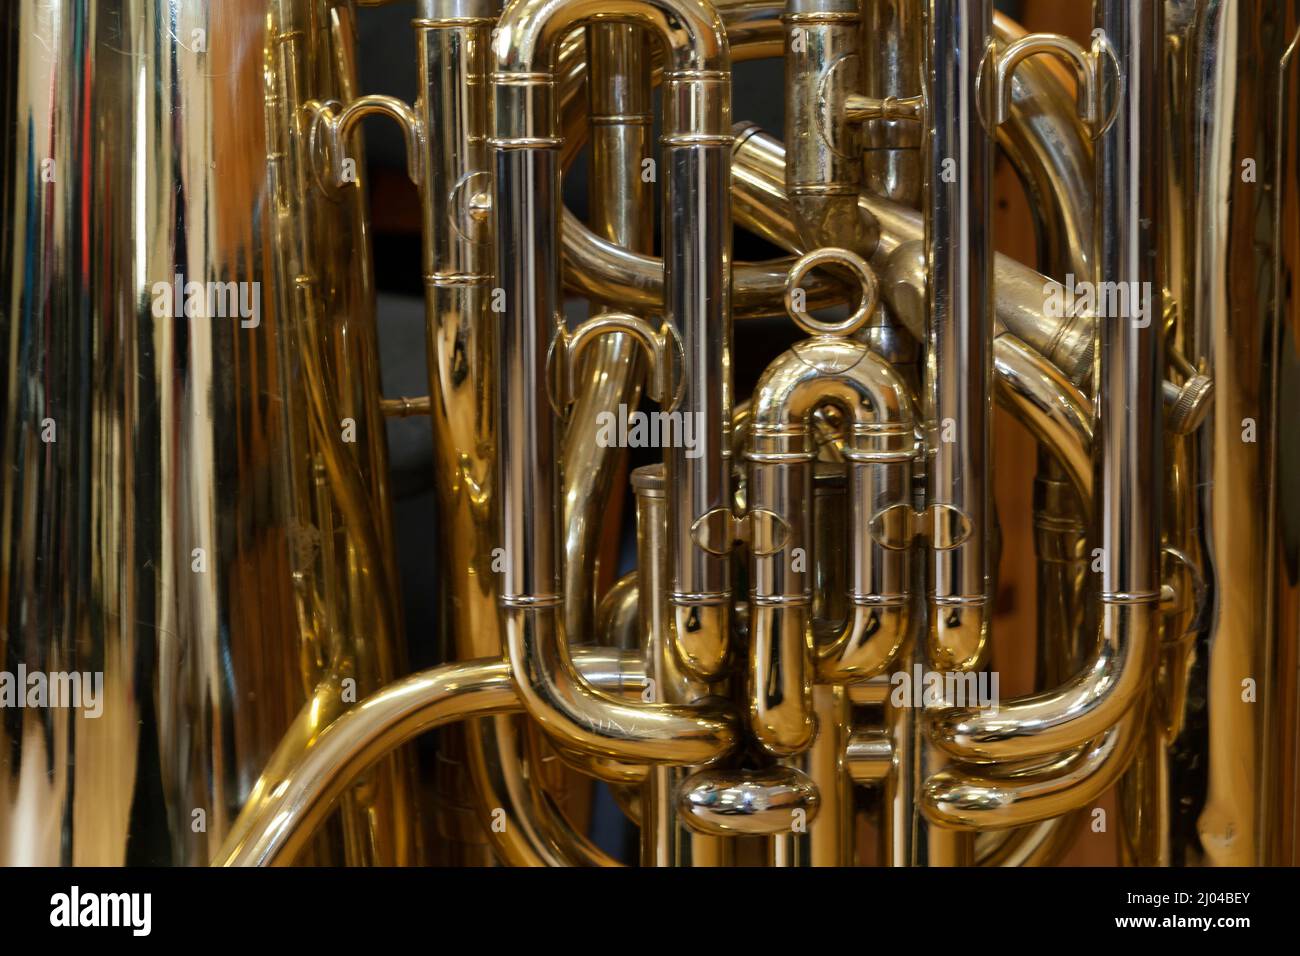 Abstract close-up of the complex tubing of a brass instrument: a tuba Stock Photo